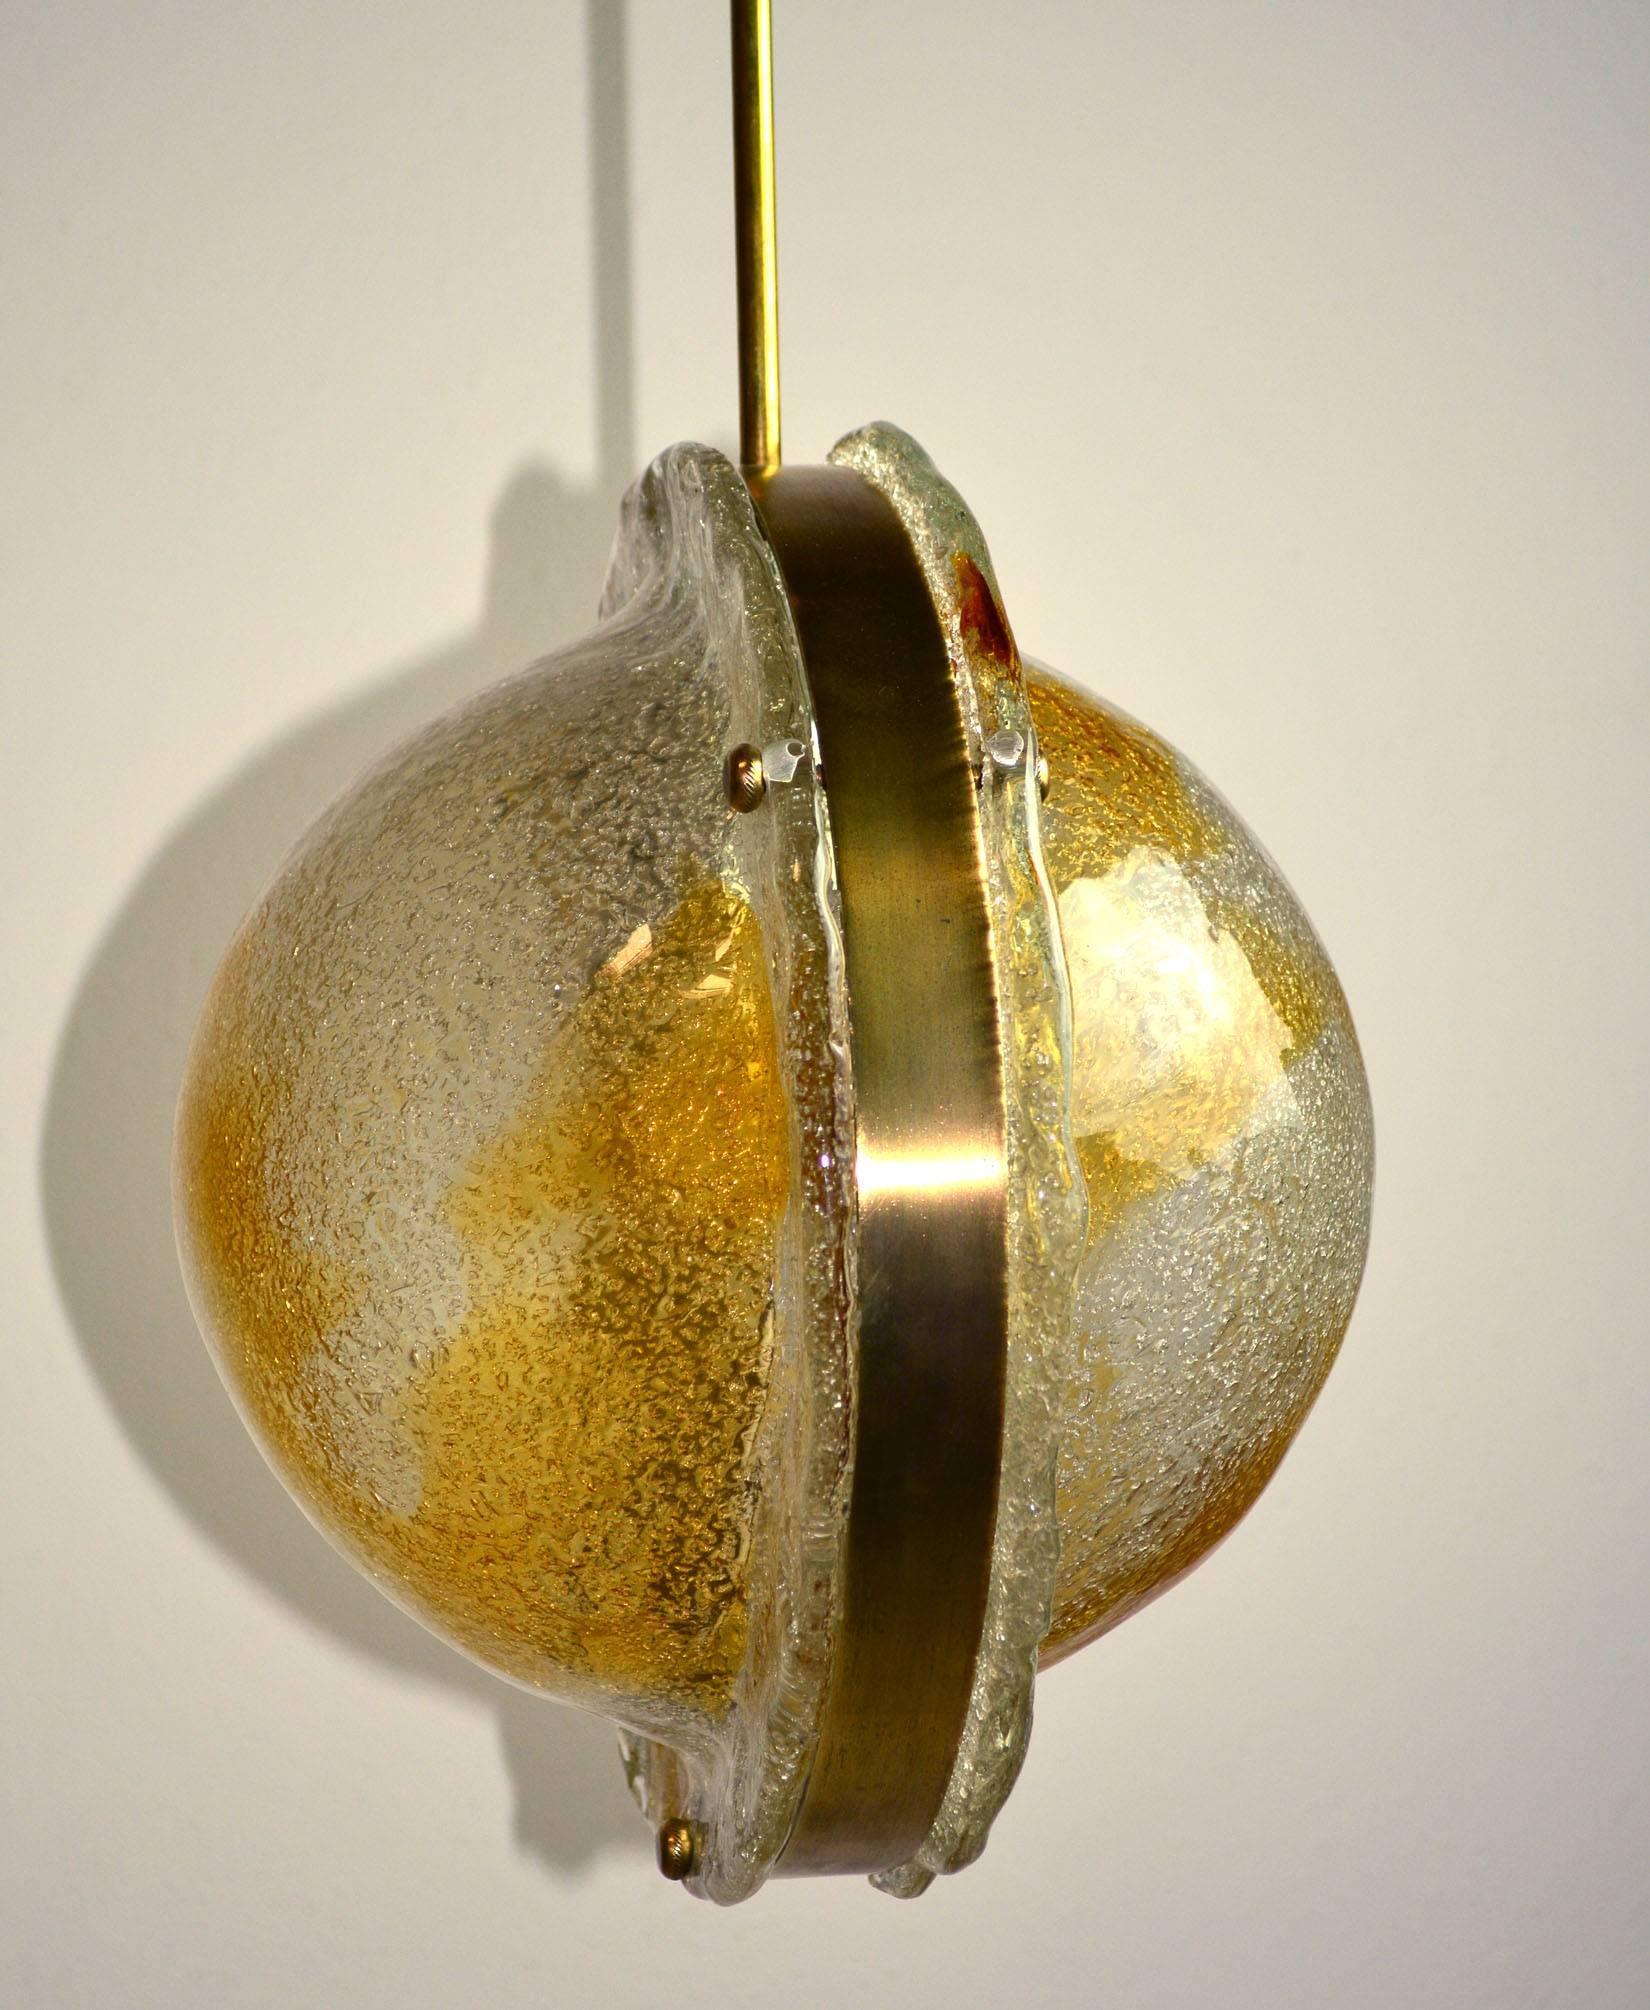 An Italian Murano glass light fixture by Mazzega of two cast pieces of clear glass with amber swirls on a brass tone armature.